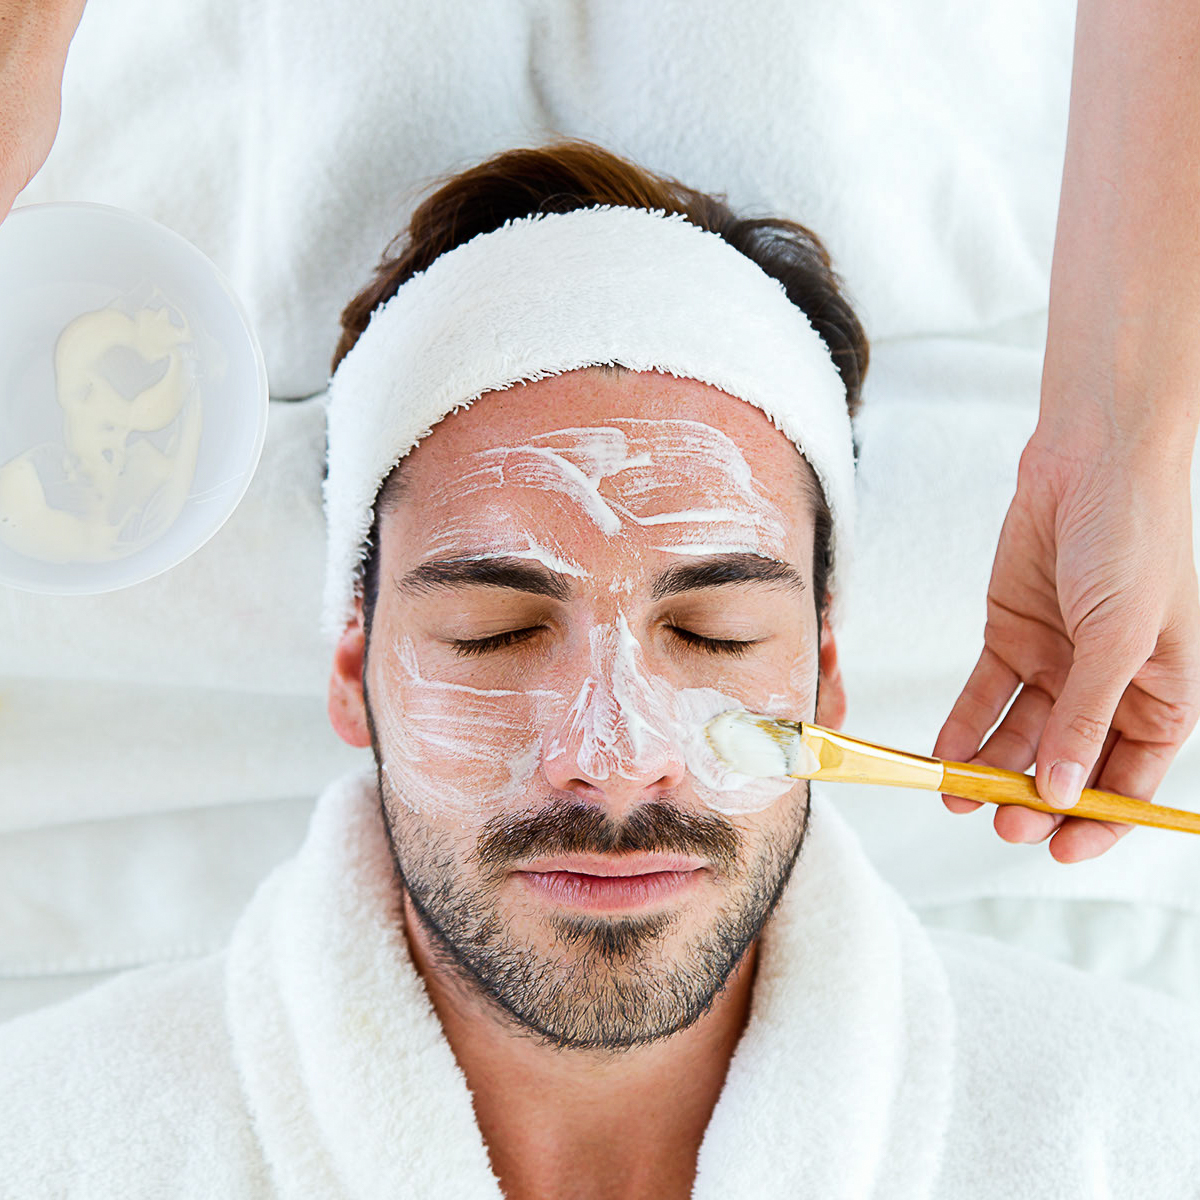 Man with clay facial mask in beauty spa.